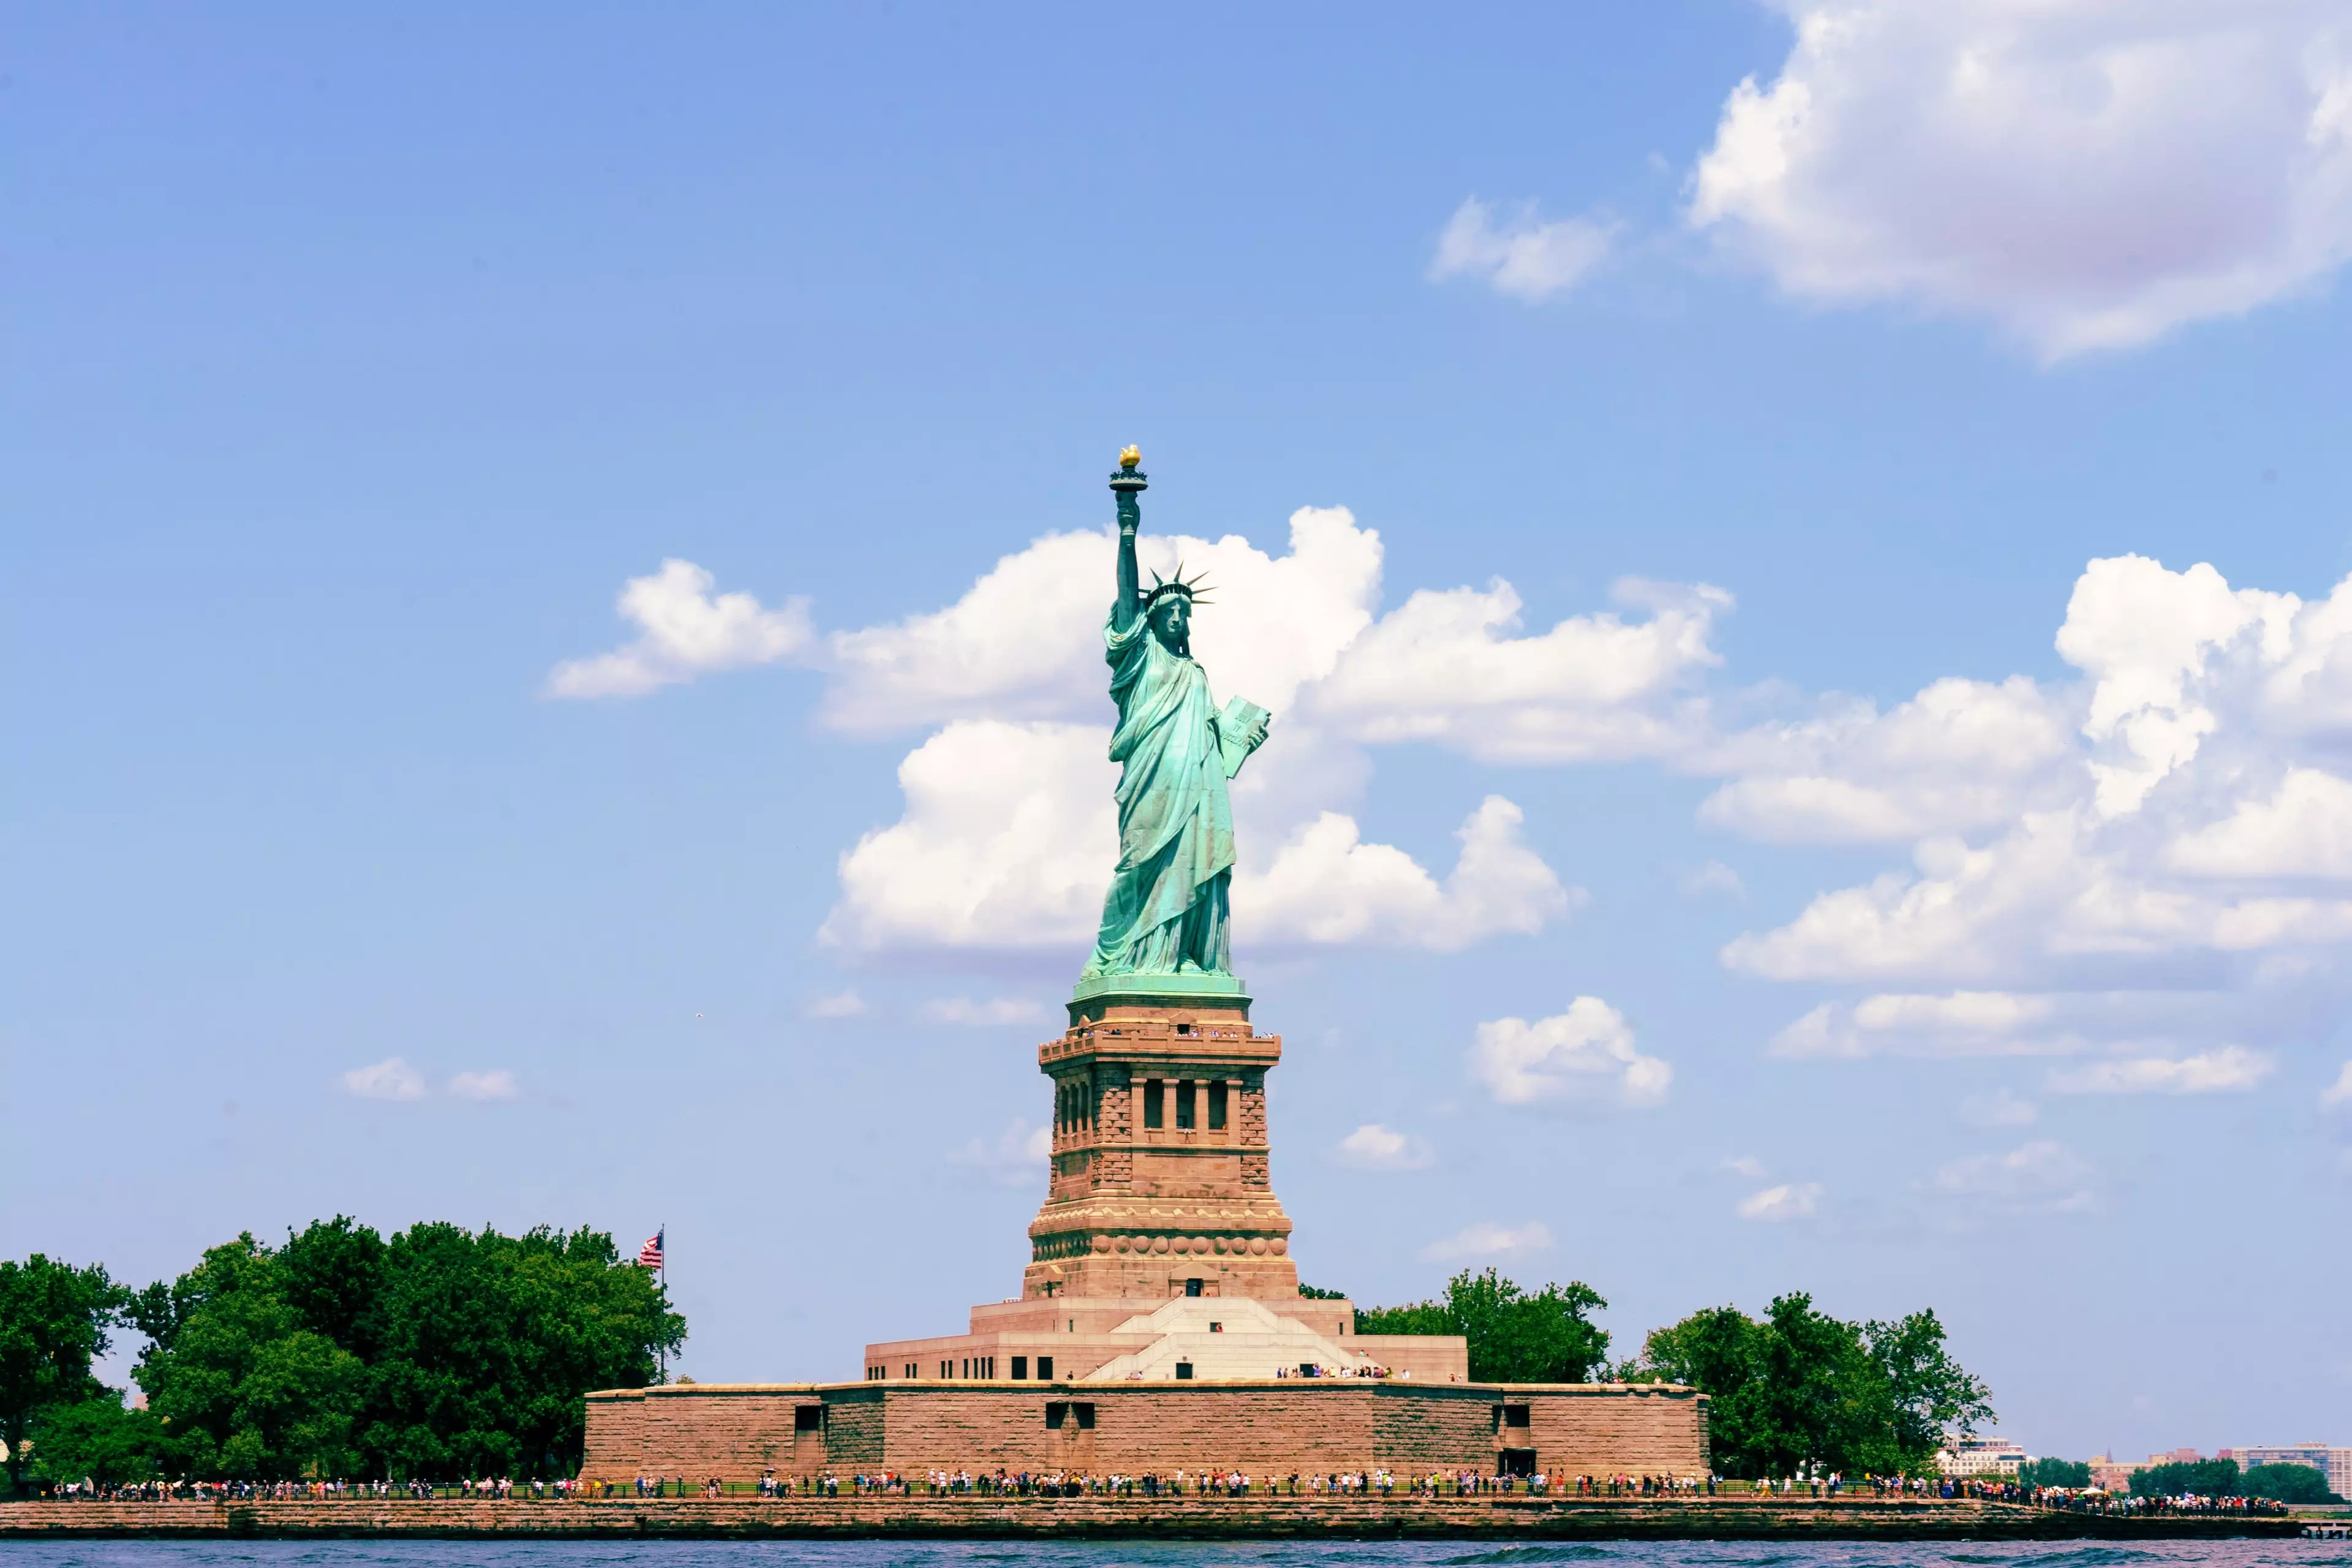 You could be jetting off to New York for as little as £280 (